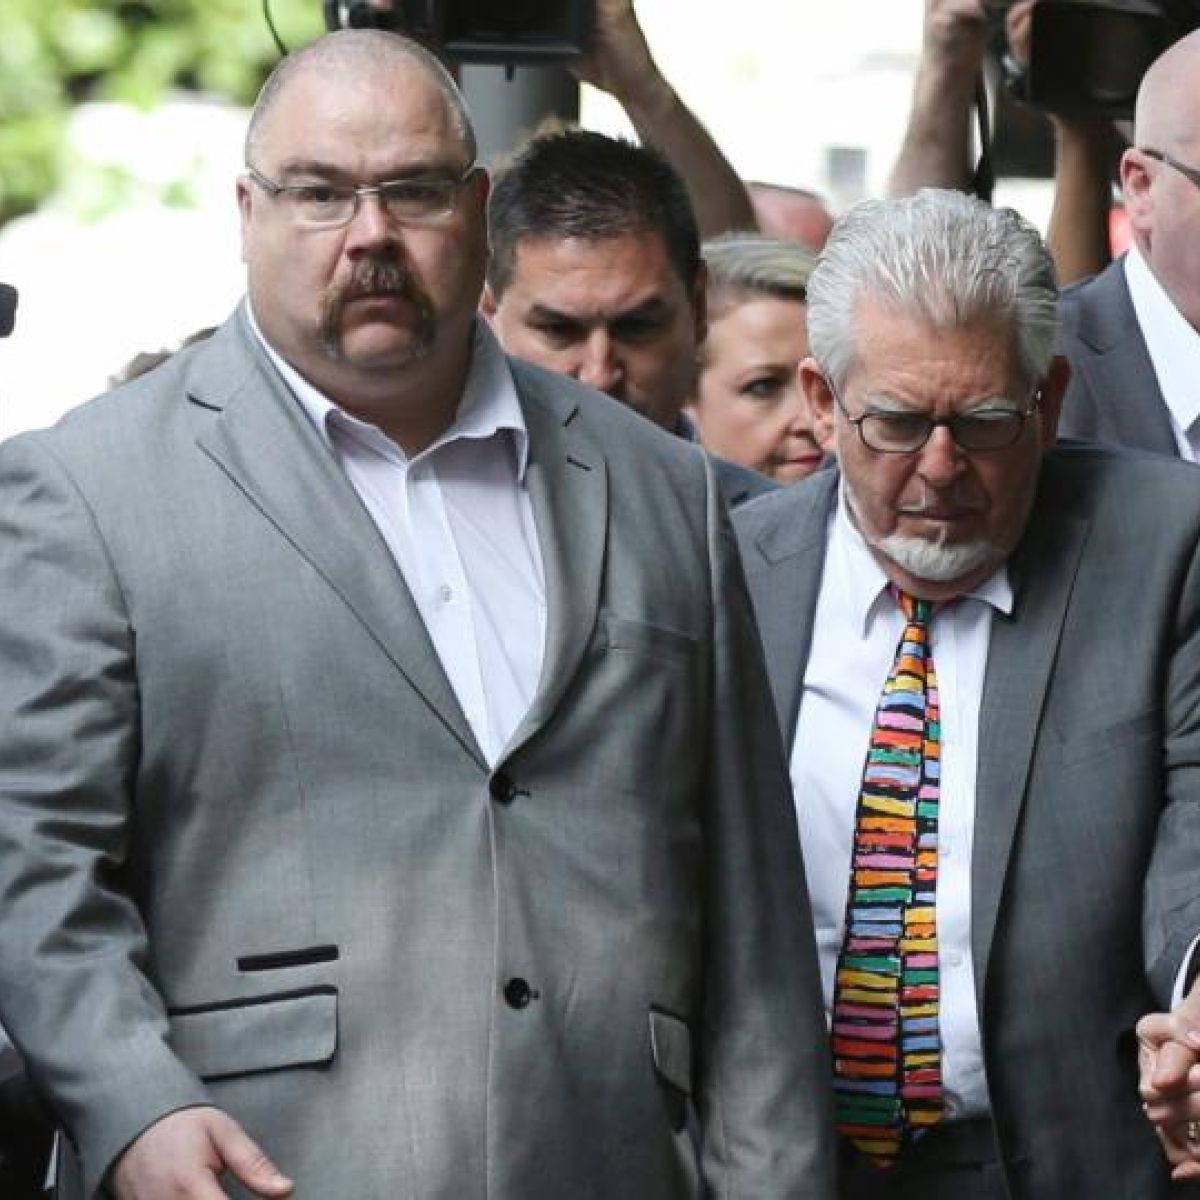 Little Nieces - Rolf Harris won't face trial over 'sexual images'